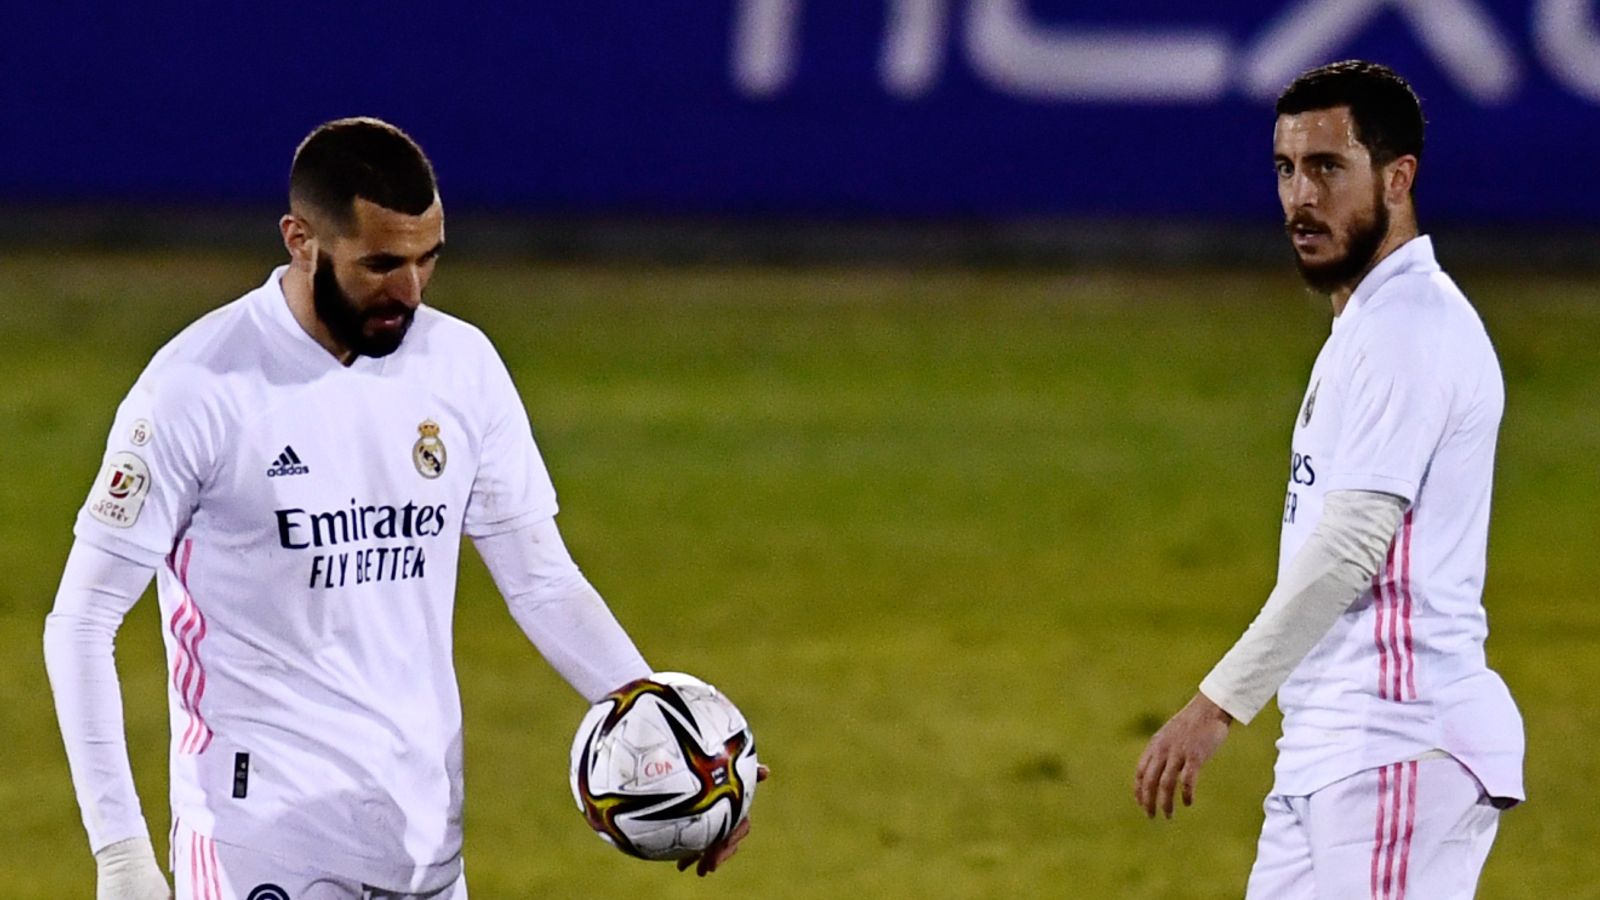 Real Madrid stunned by Alcoyano in Copa Del Rey - European round-up | Football News | Sky Sports